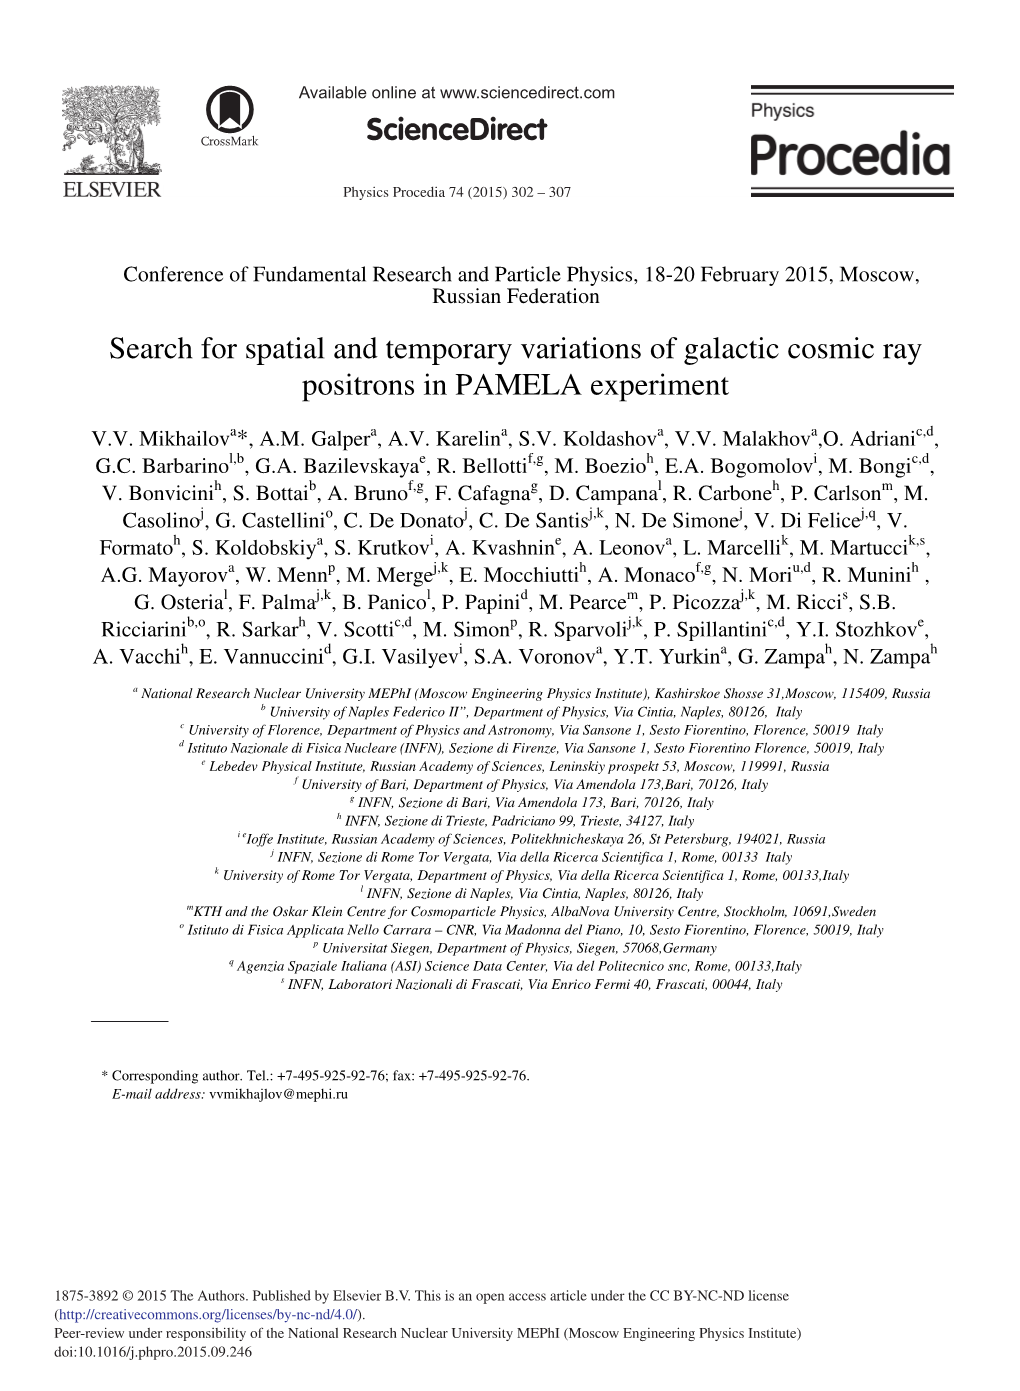 Search for Spatial and Temporary Variations of Galactic Cosmic Ray Positrons in PAMELA Experiment